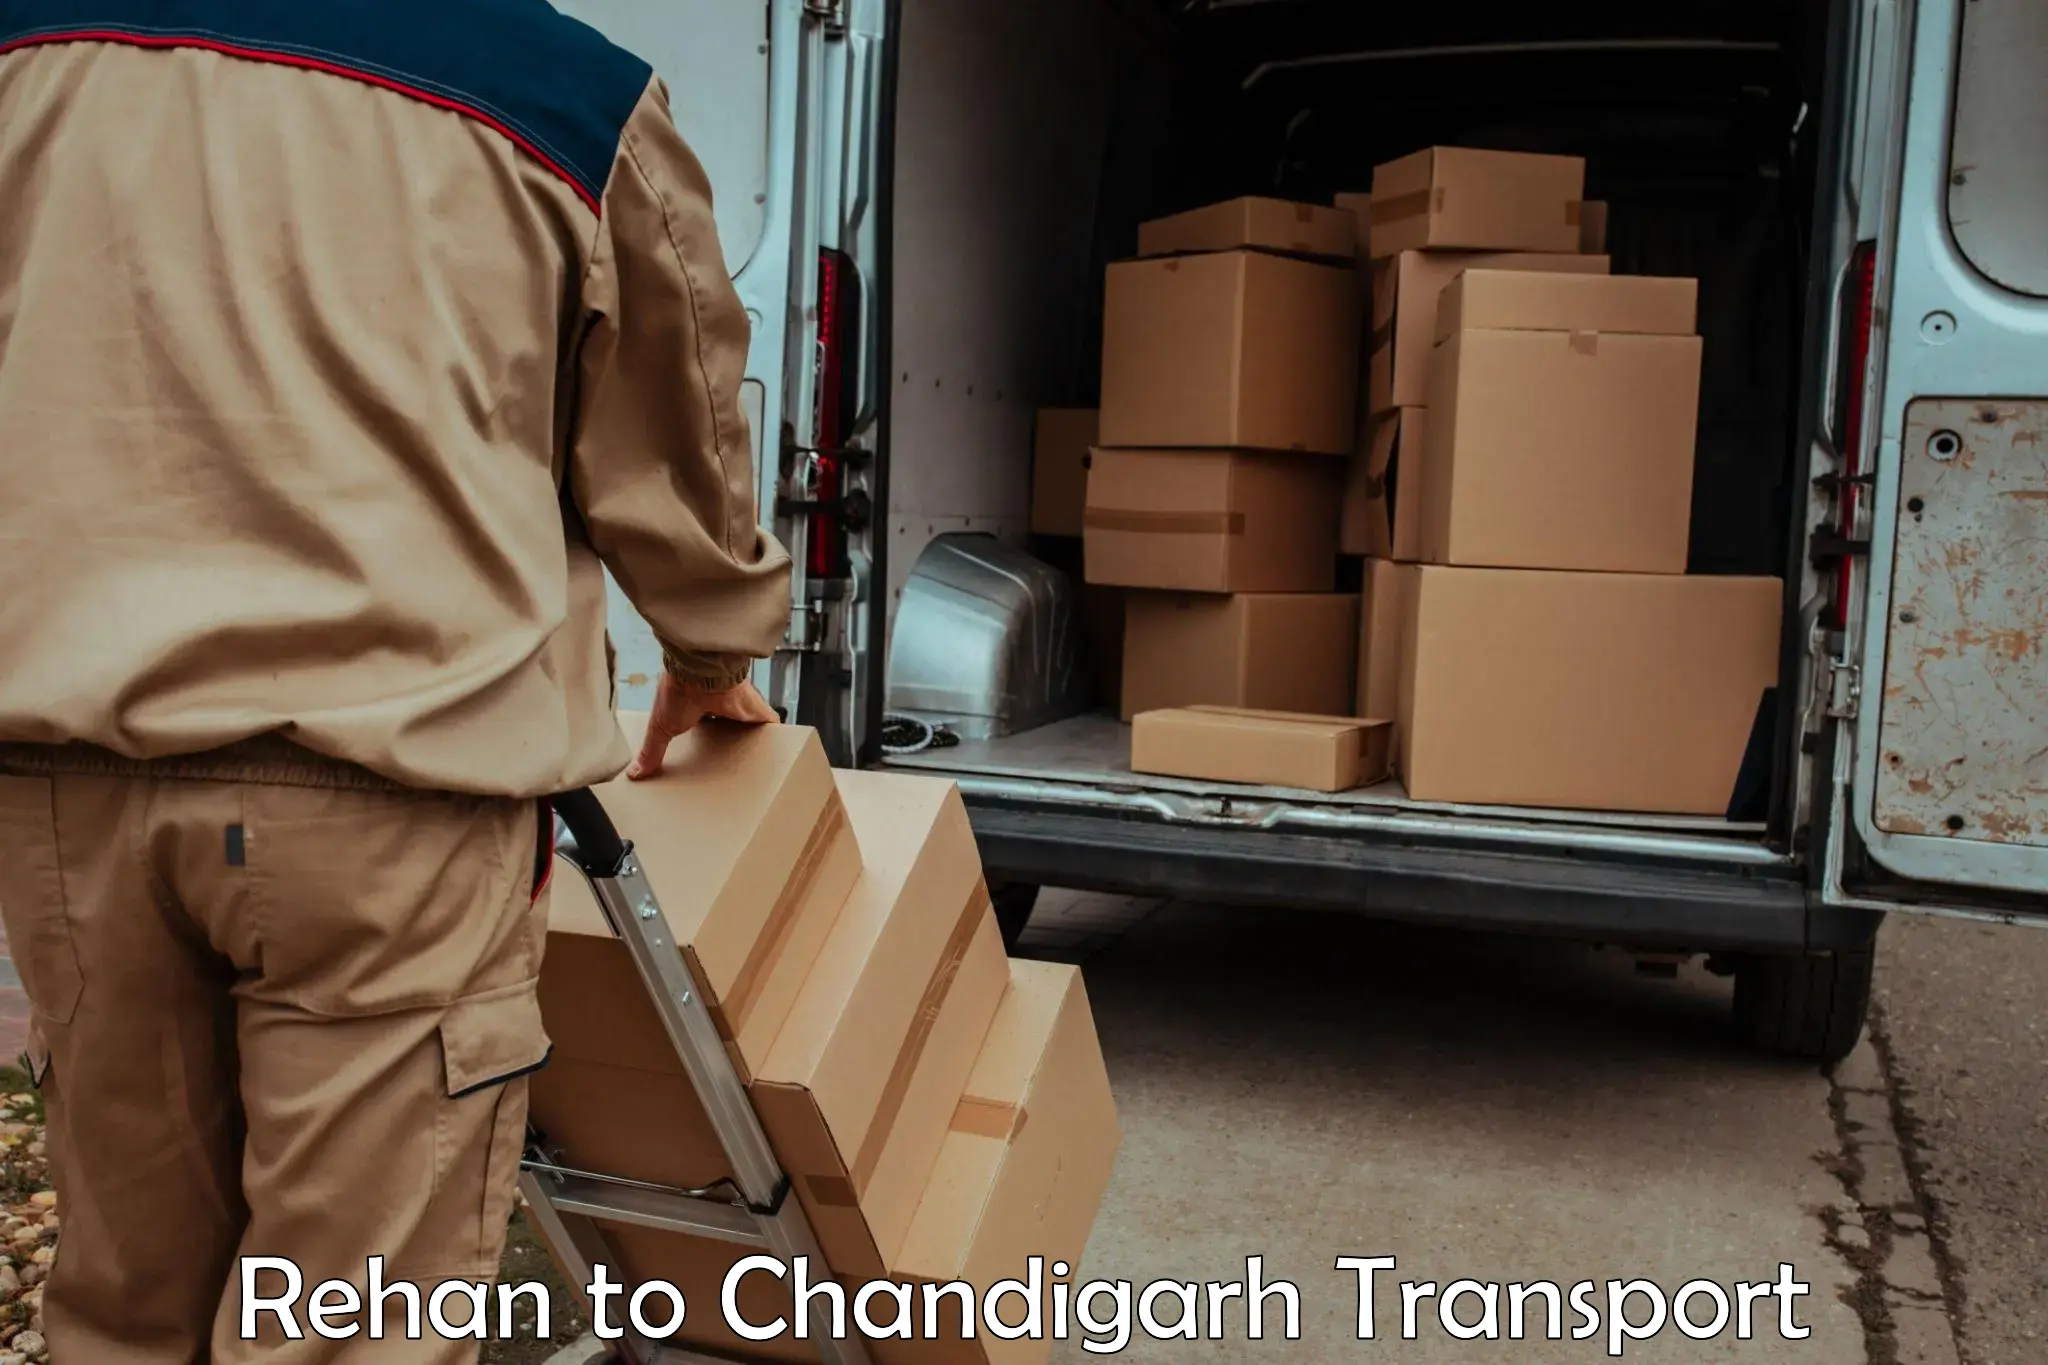 Container transport service Rehan to Chandigarh